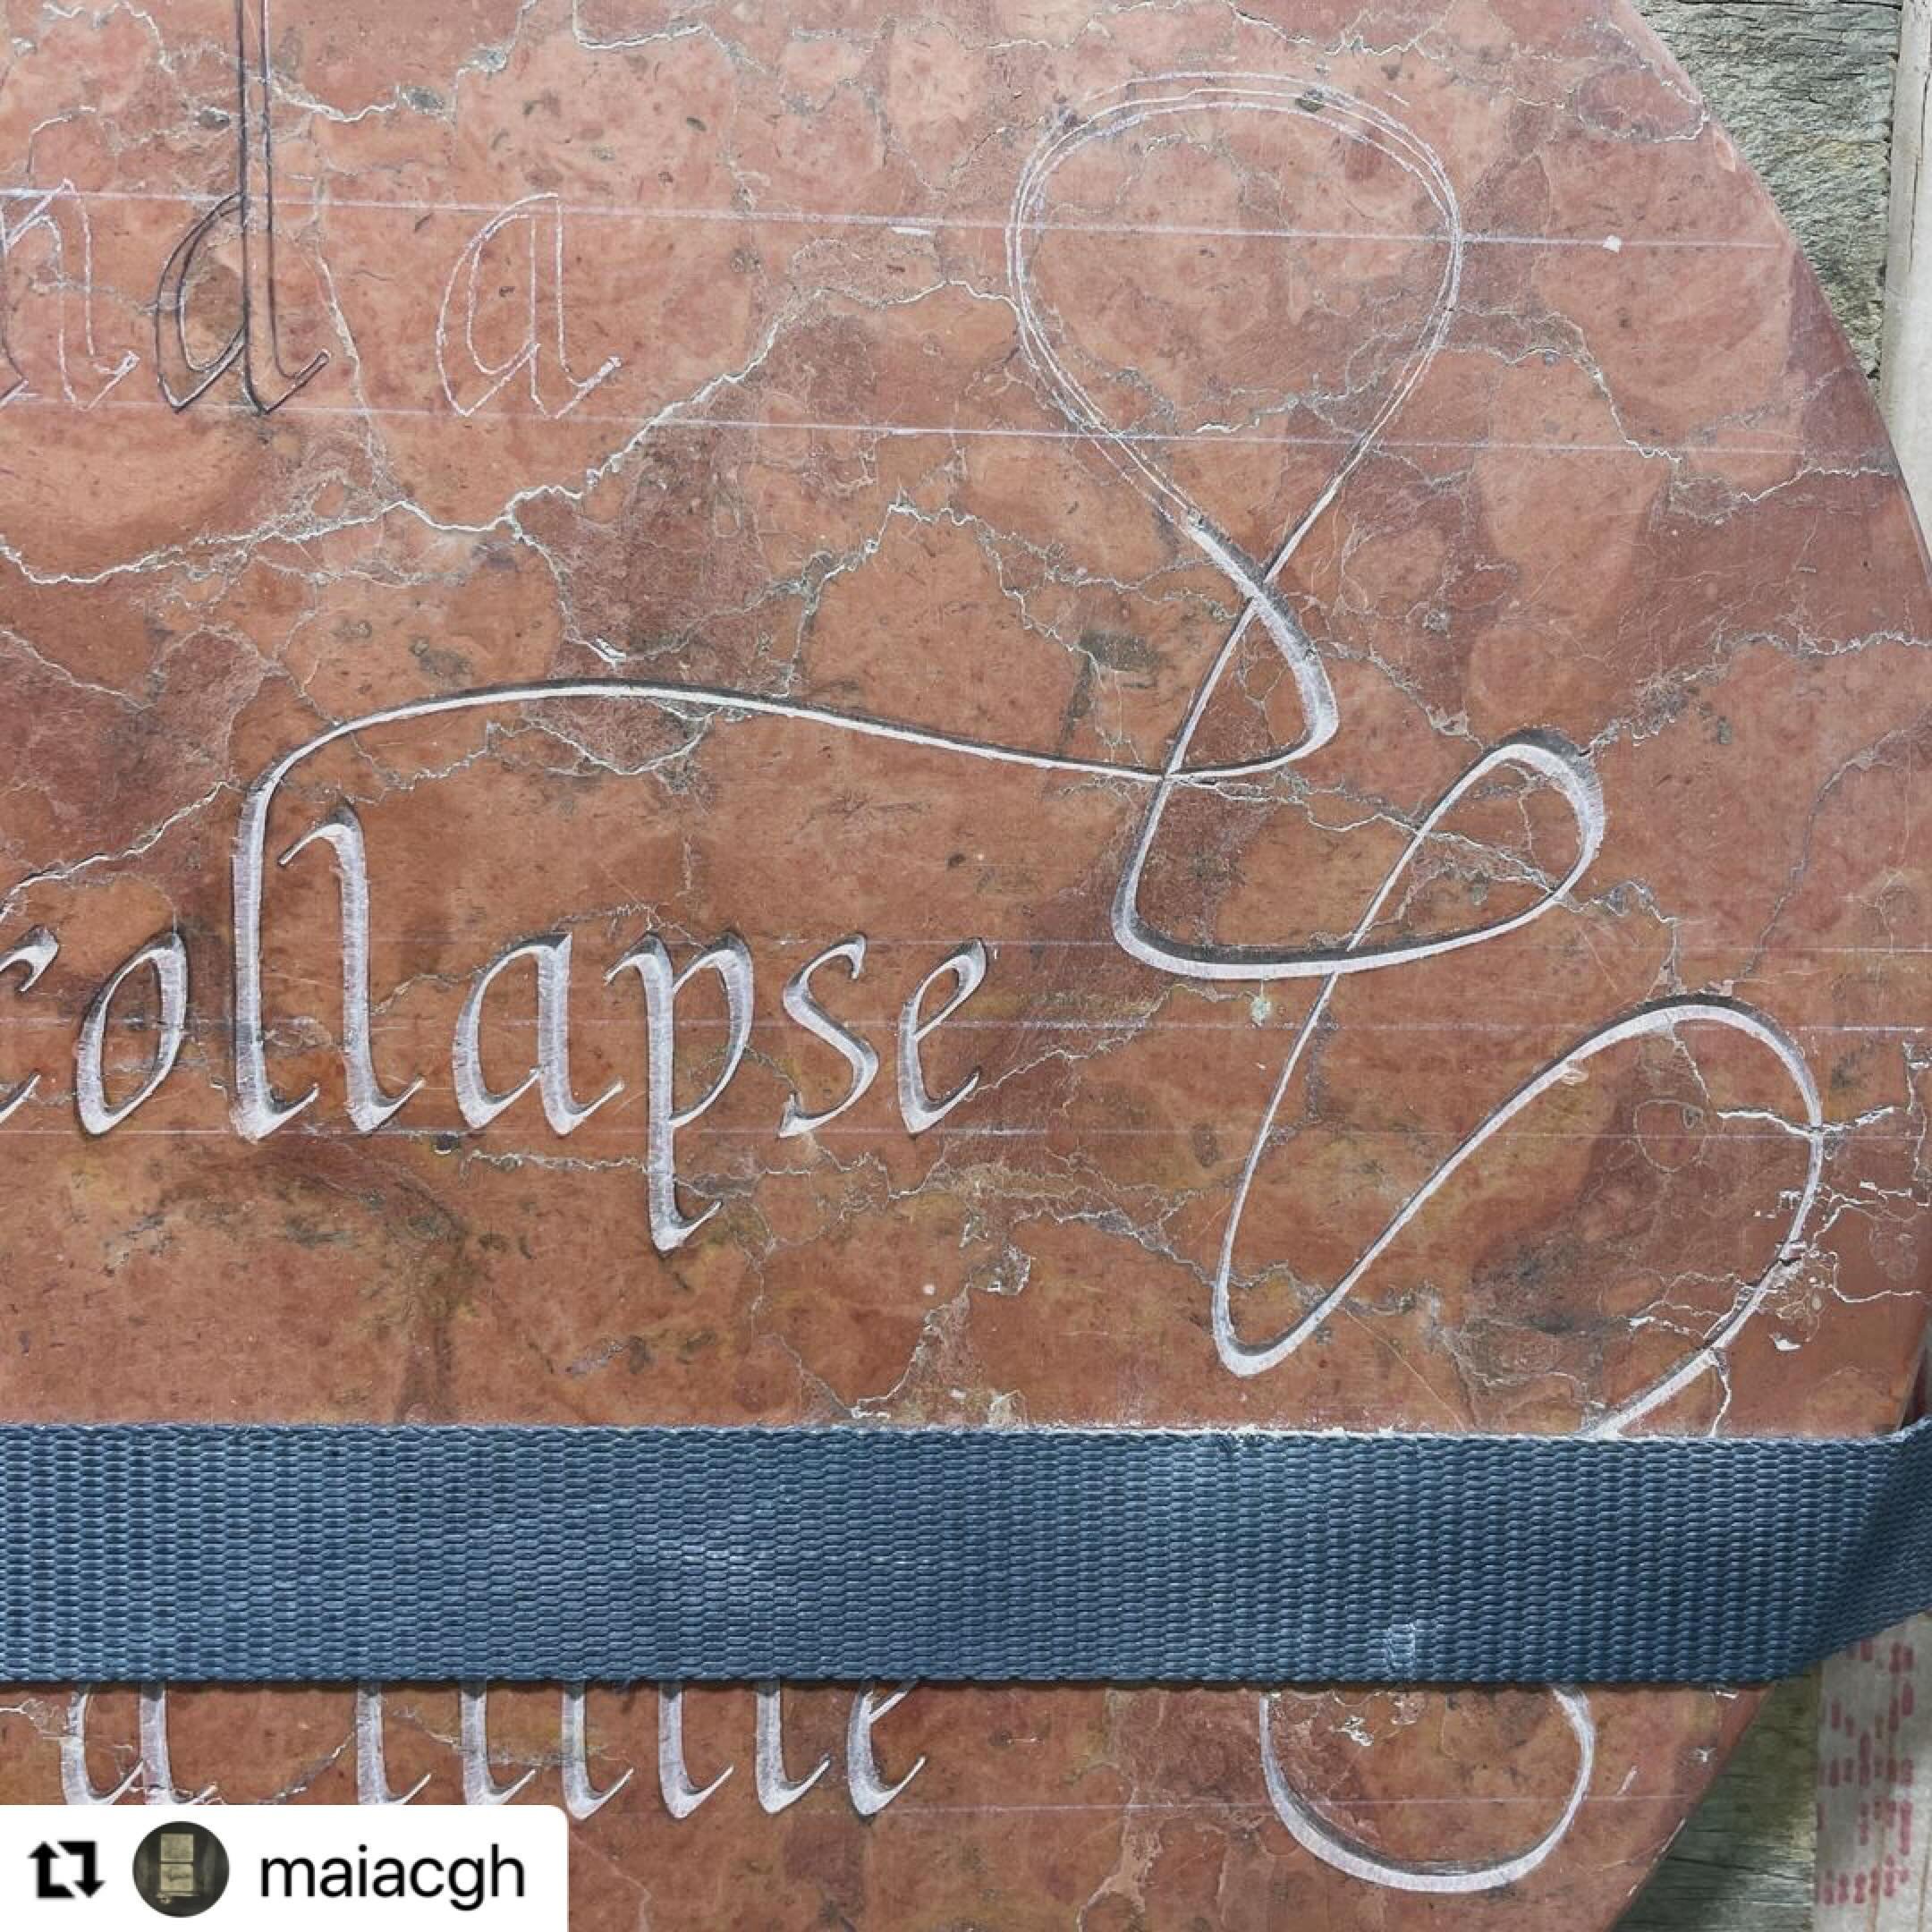 You can read more about Maia&rsquo;s apprentice journey with @charlotticushowarth and The Lettering Arts Trust in her blog, which can be found on the &lsquo;Learn&rsquo; page of our website. See link in bio. 

#Repost @maiacgh
・・・
A snippet of my cur